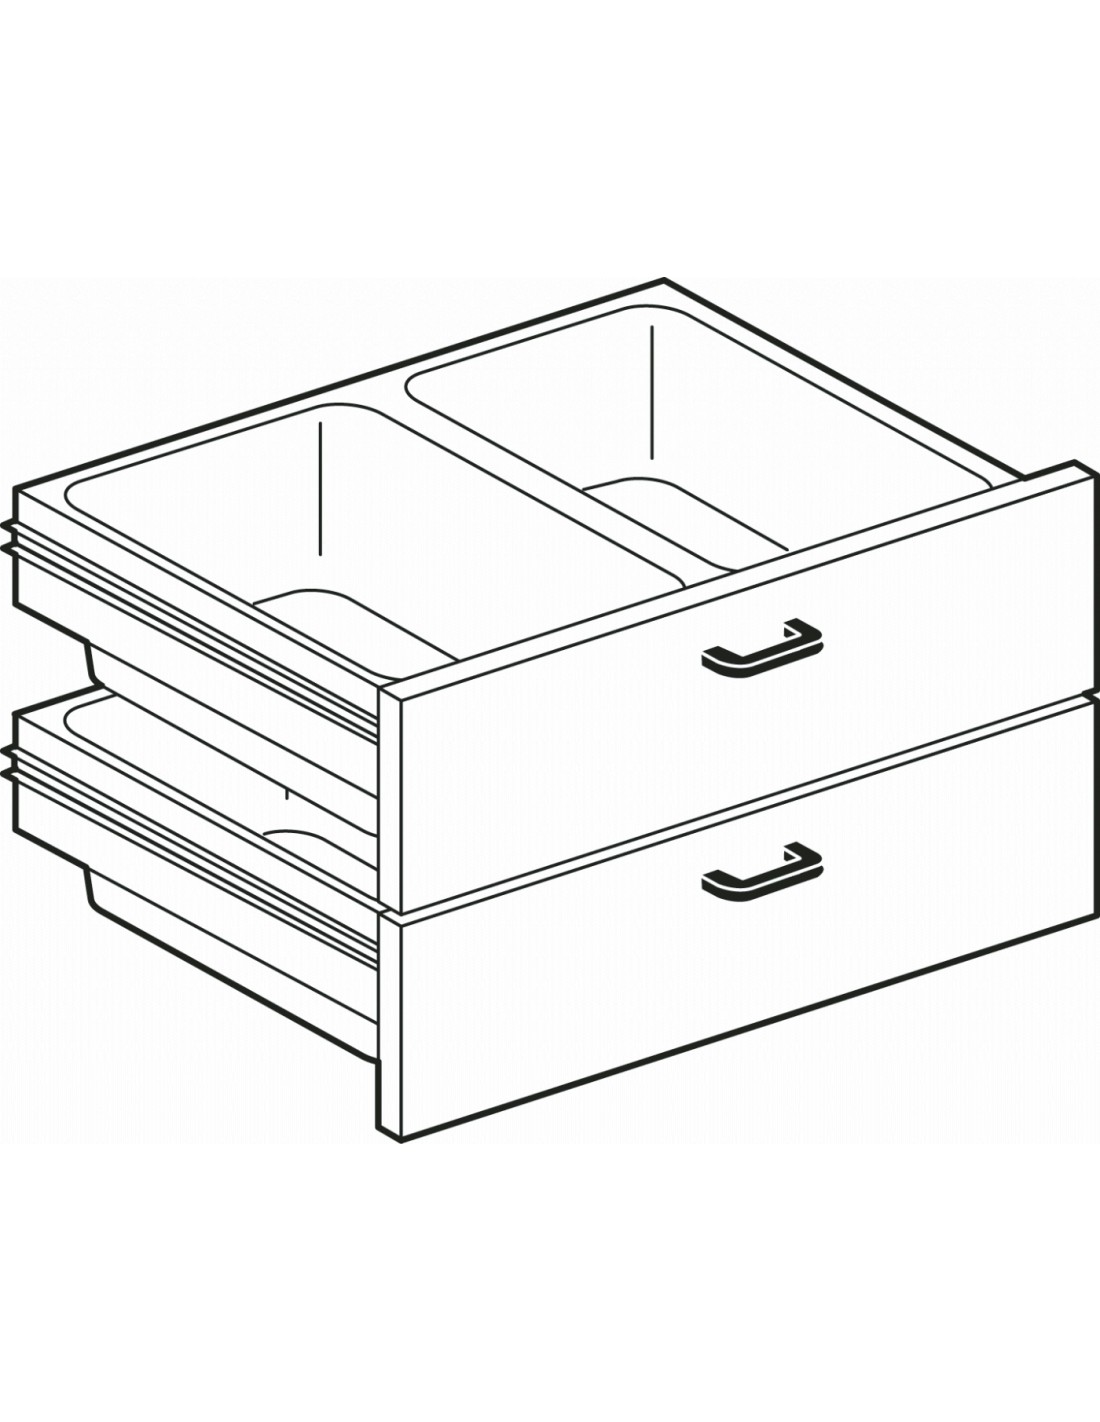 Cassettiera 800 N. 2 drawers with 4 boxes GN 1/1 15h plastic, telescopic guides - Dimensions cm. 79,5x 56x 45h